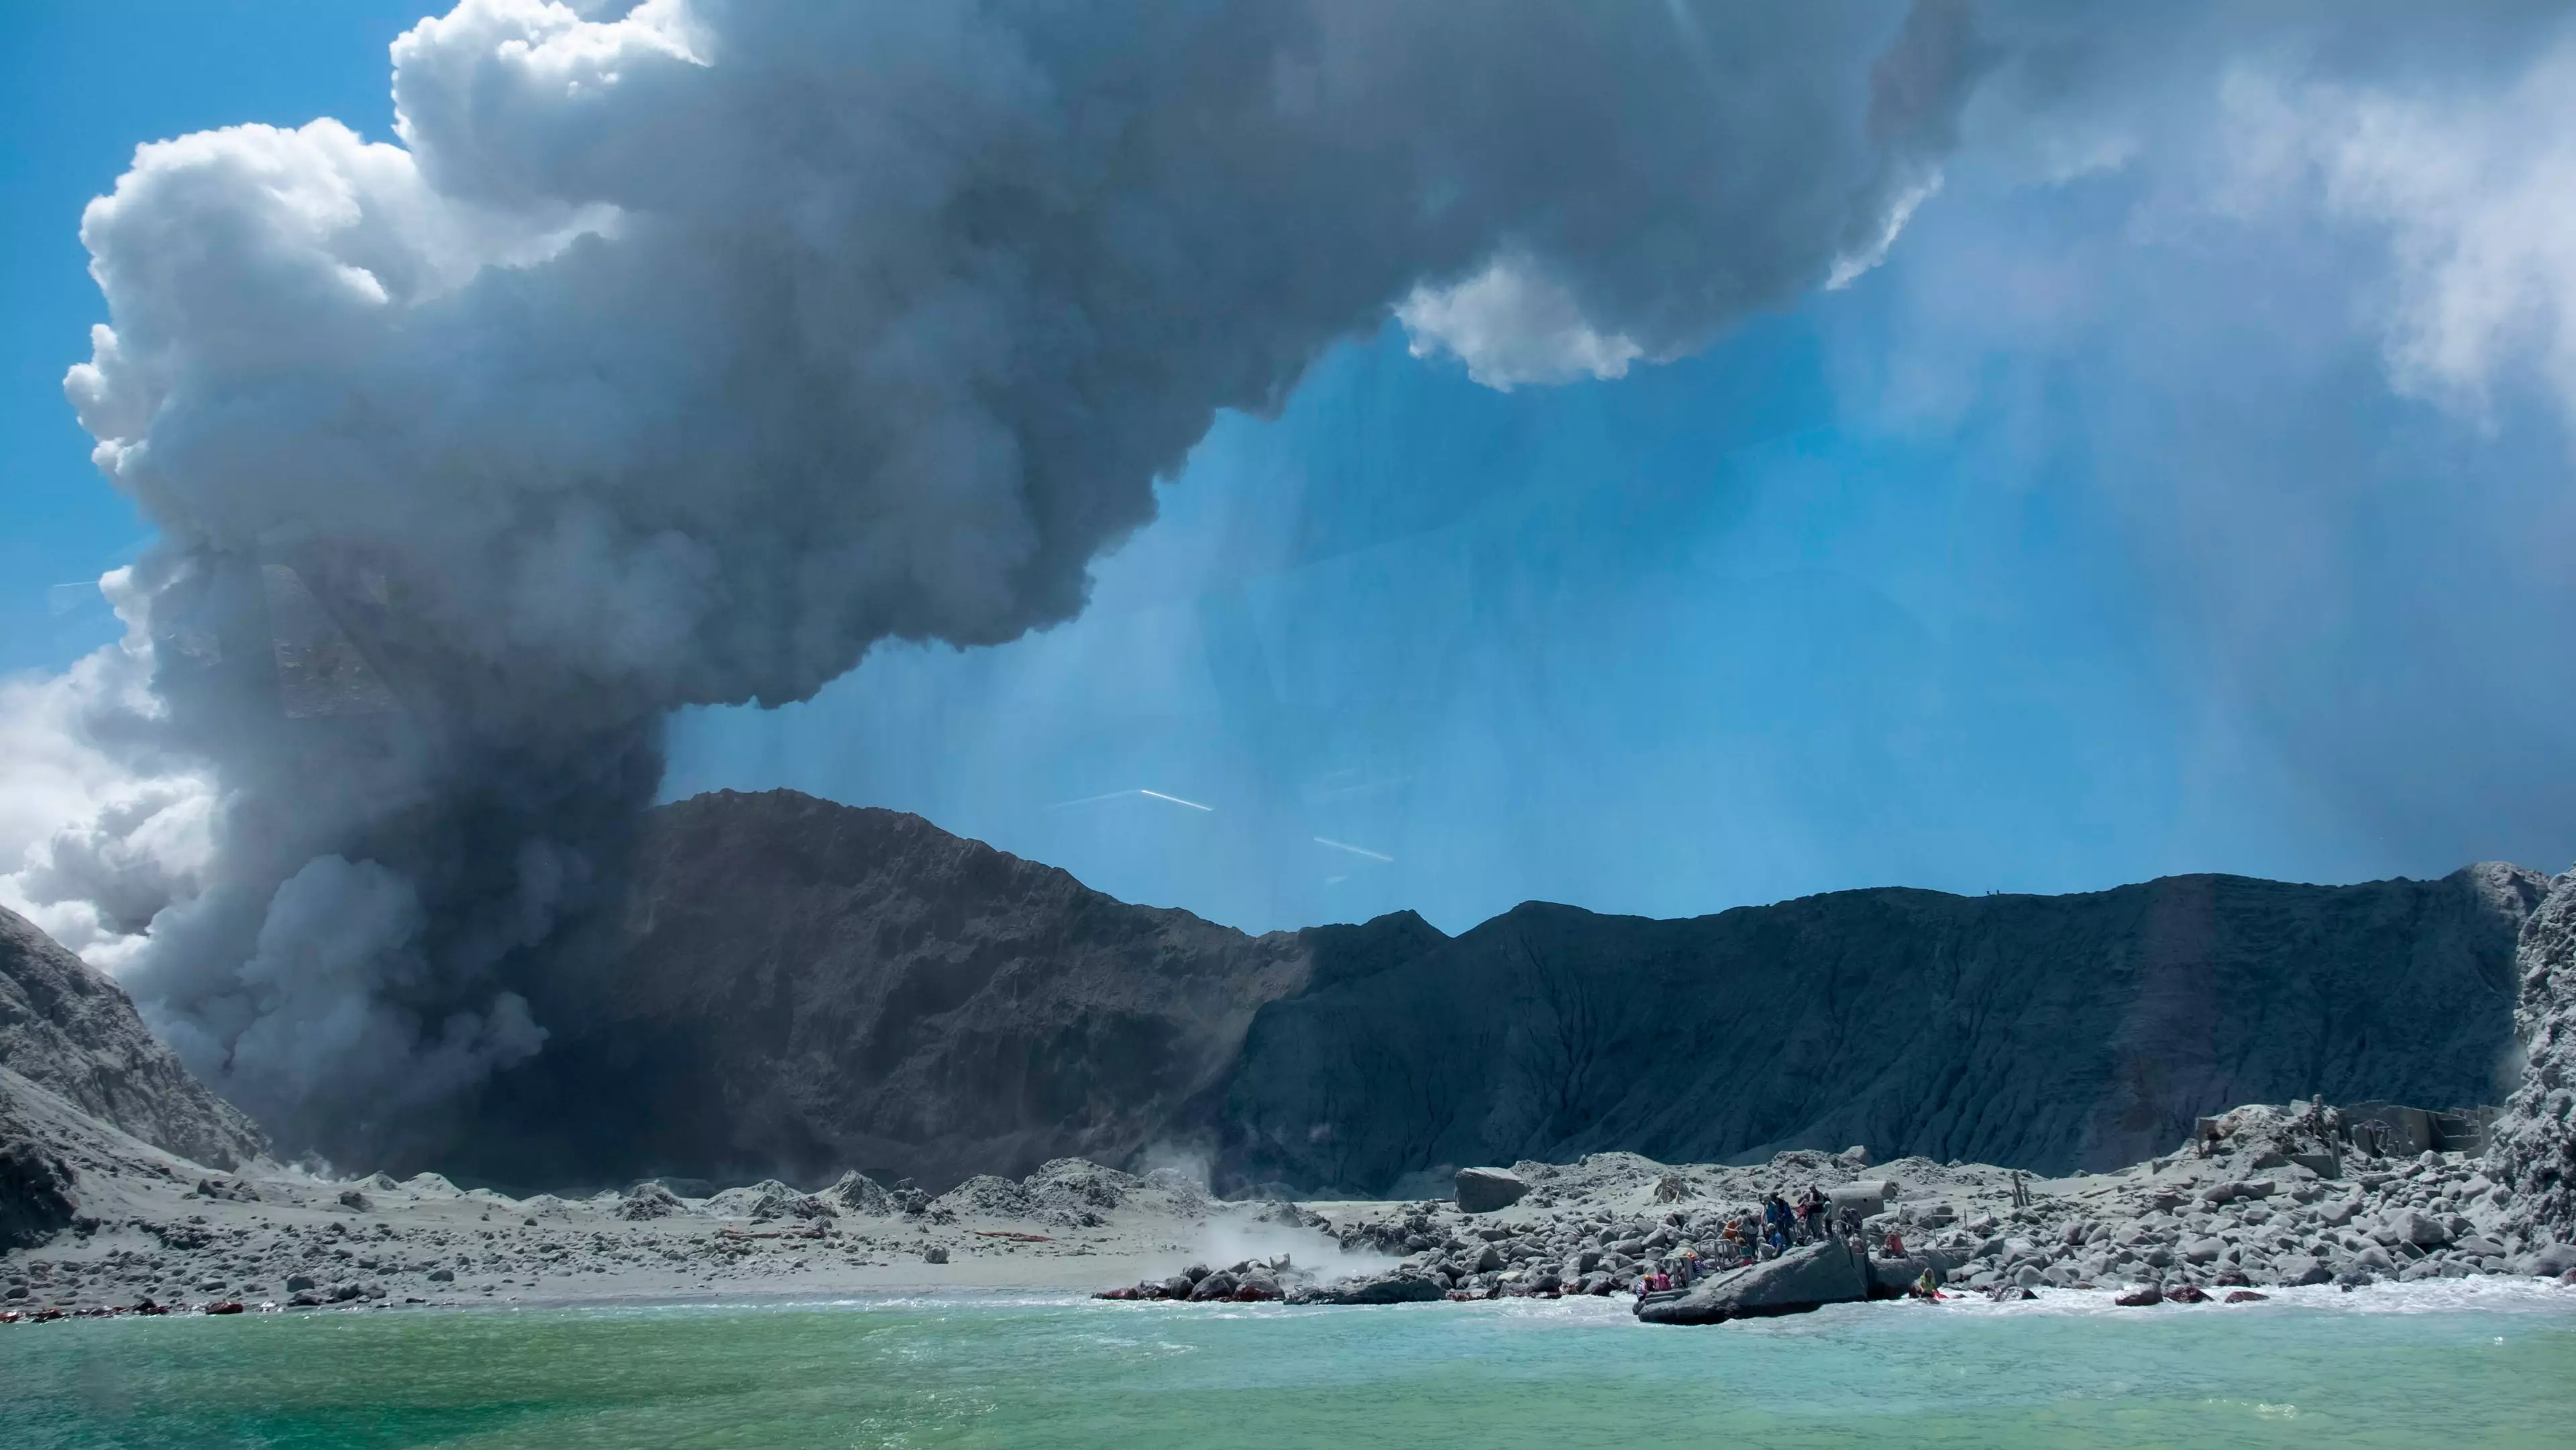 Chilling Photo Shows Tourists In White Island Crater Moments Before Eruption